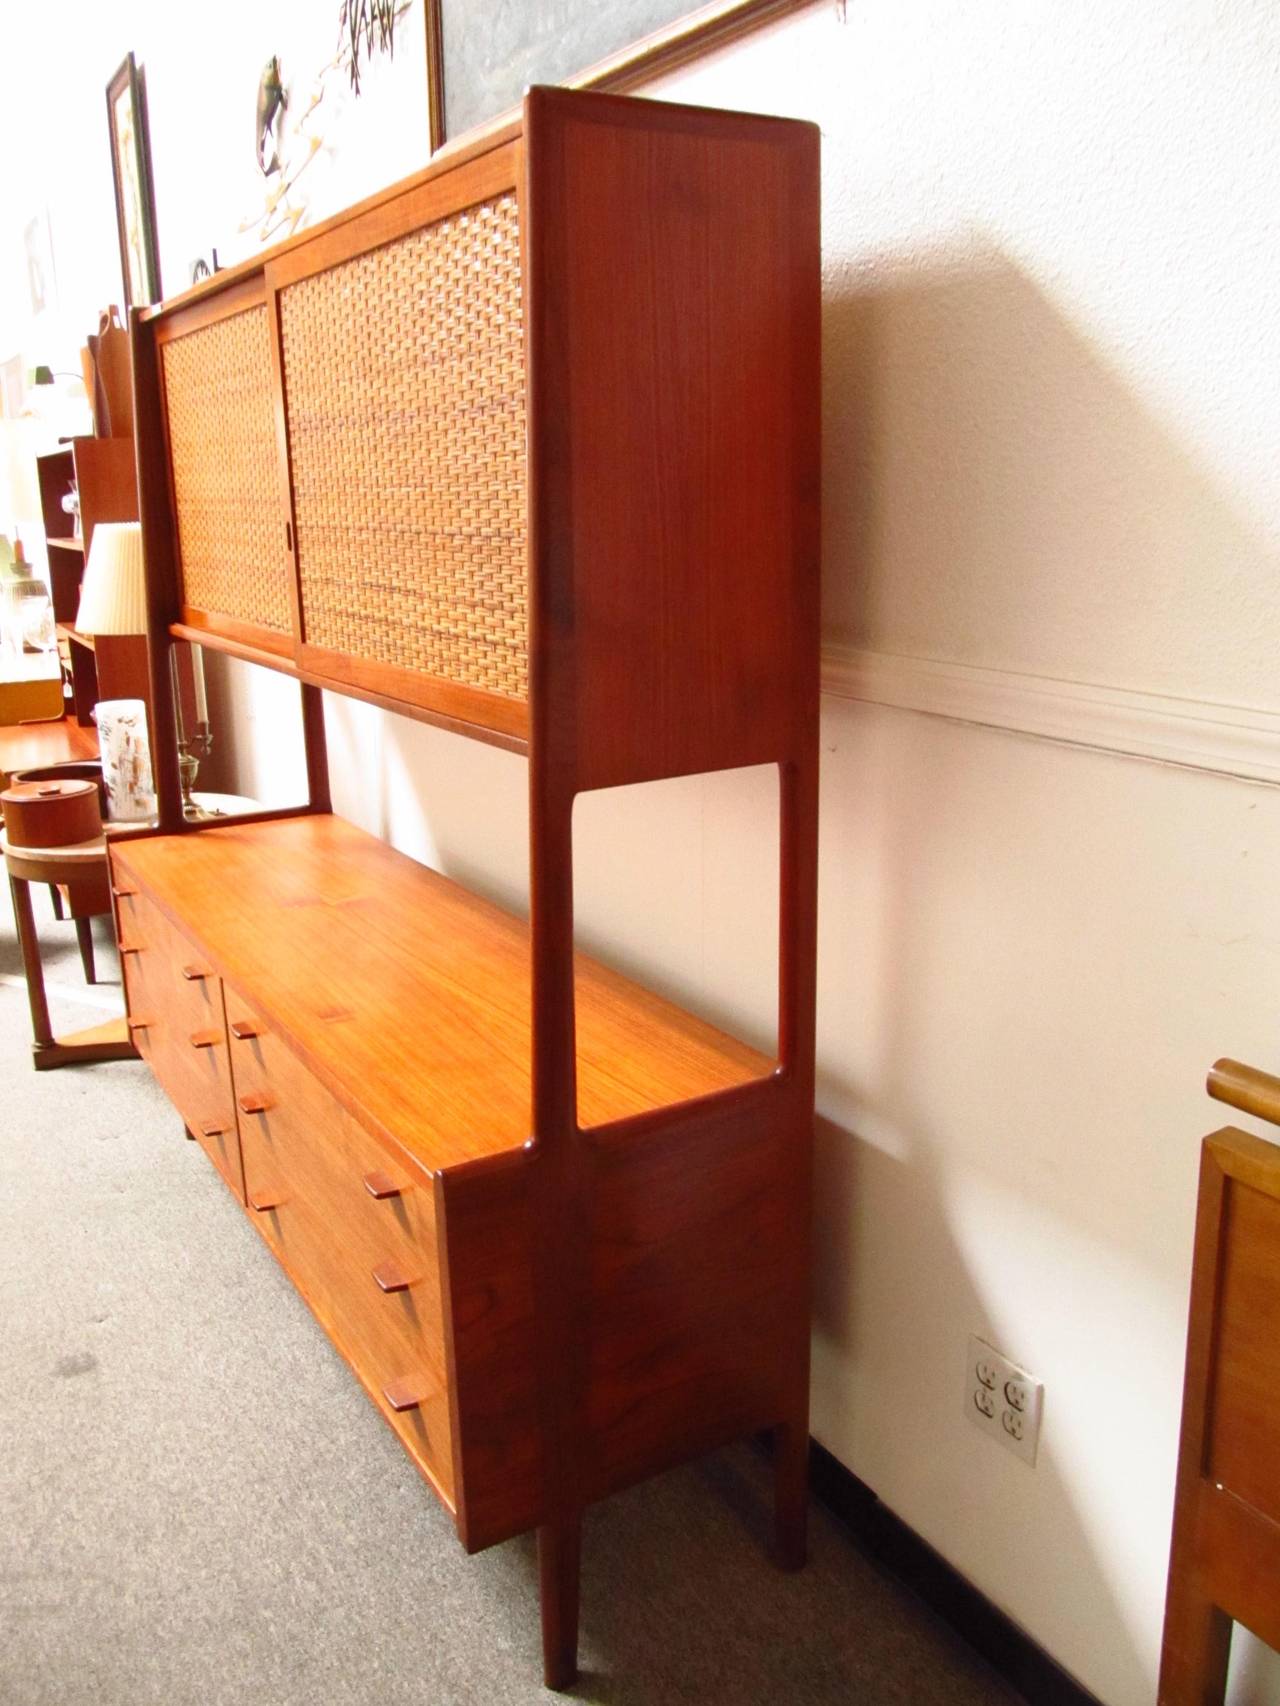 This is a truly striking piece of furniture. It's a somewhat rarer version because of the contrasting caned doors on the top. Two sliding doors reveal a beautiful blonde interior with a total of five shelves. The six drawers have rosewood tab